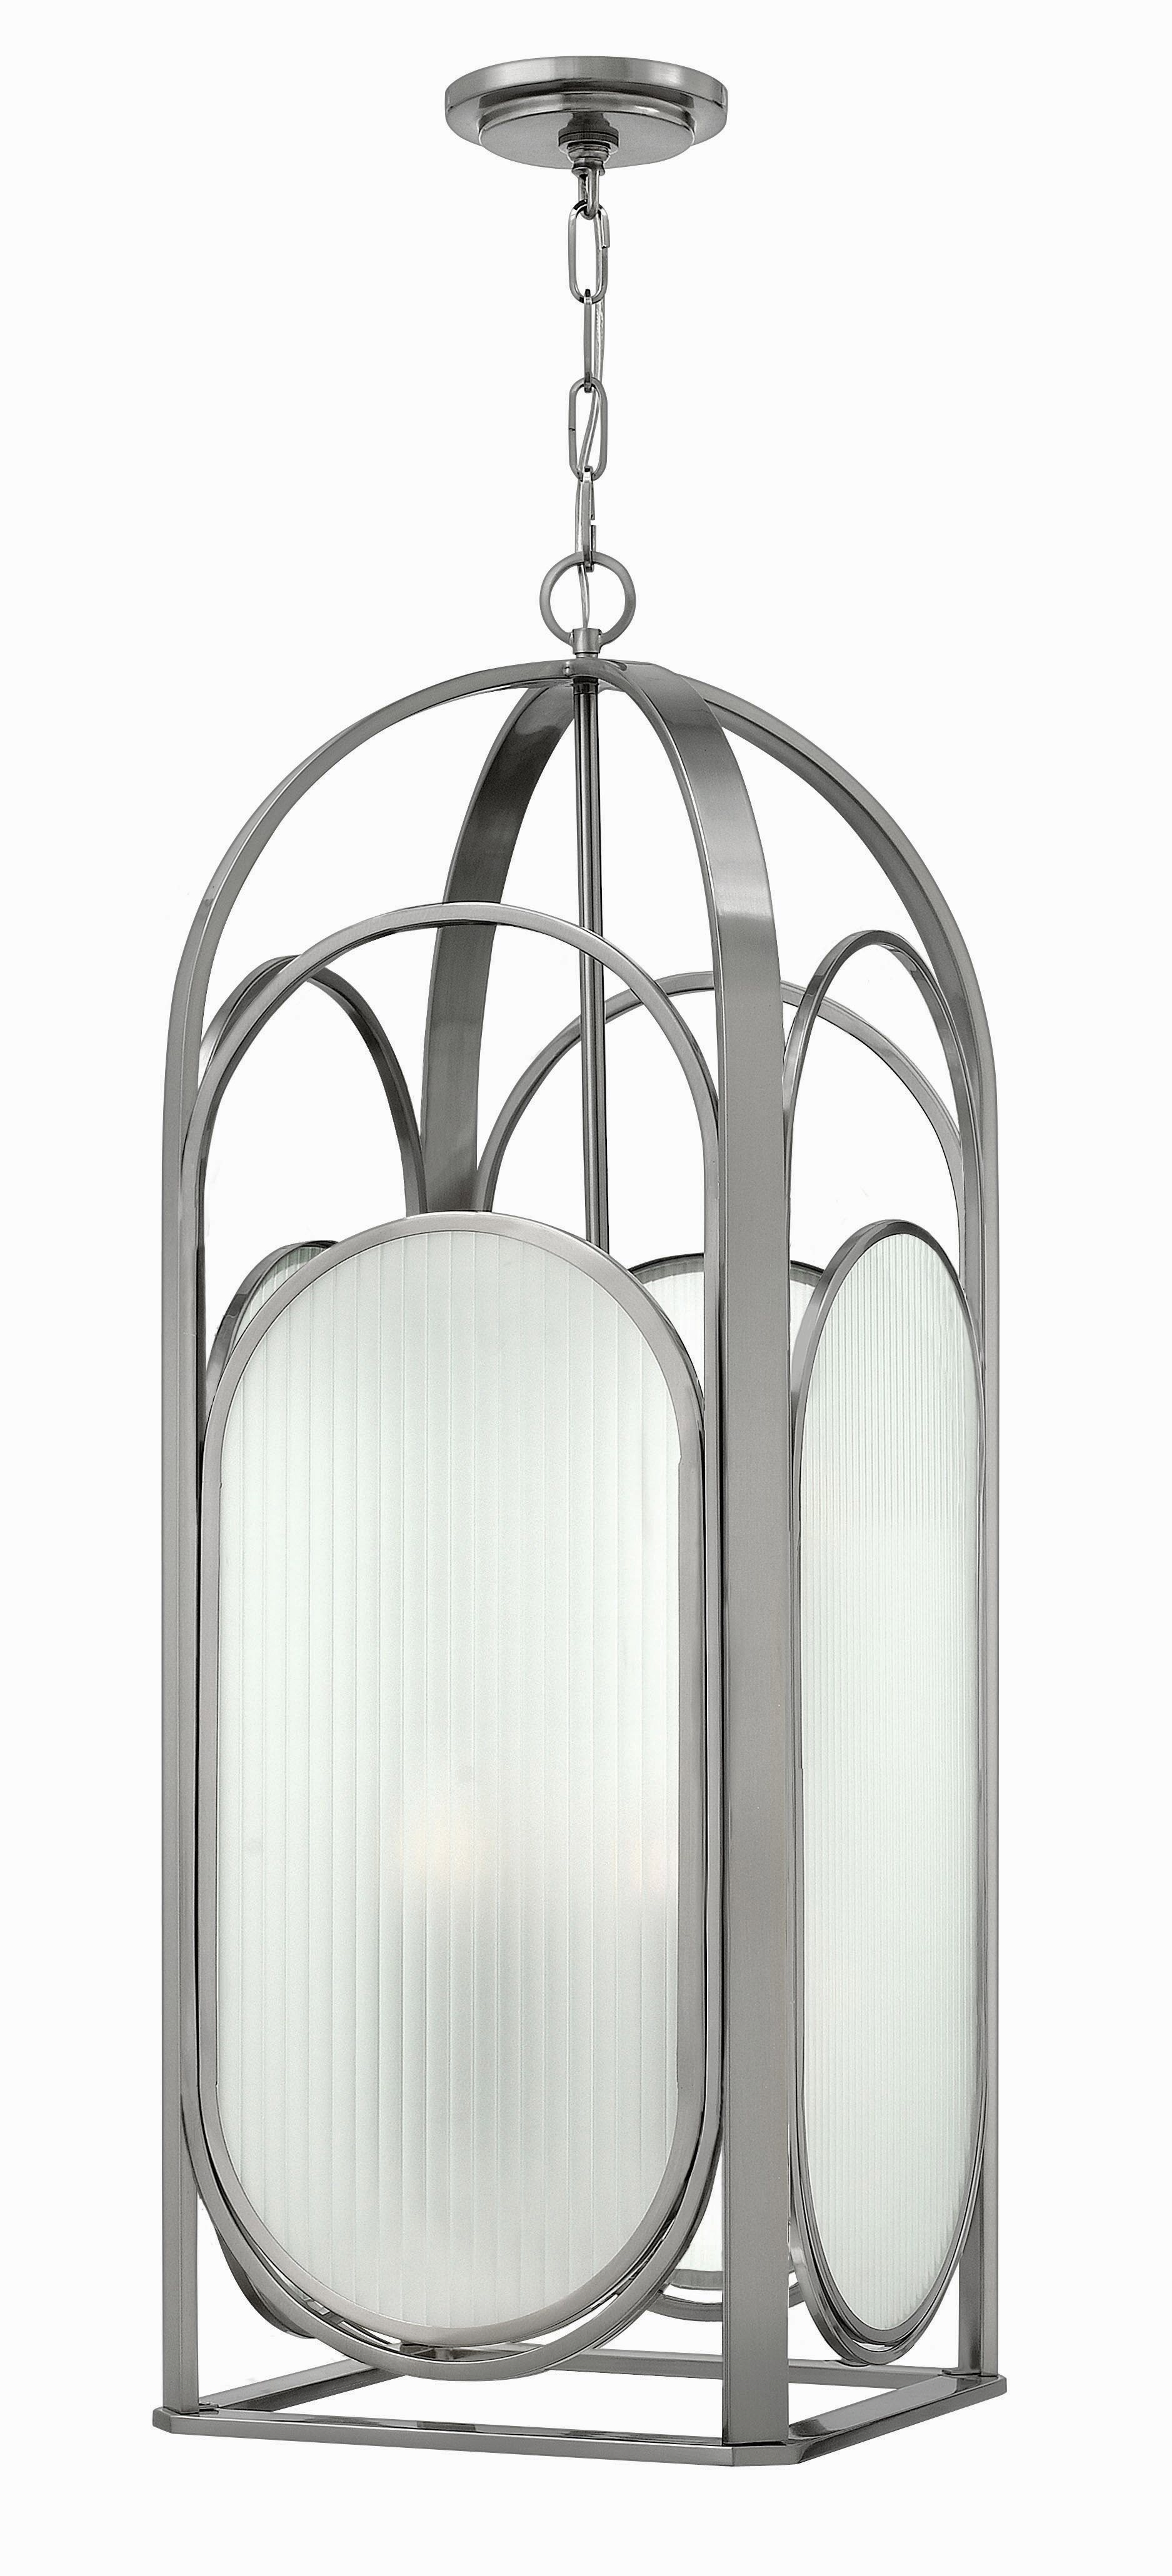 Hinkley Lighting-3885BN-Astor - Four Light Foyer   Brushed Nickel Finish with Ribbed Etched Glass